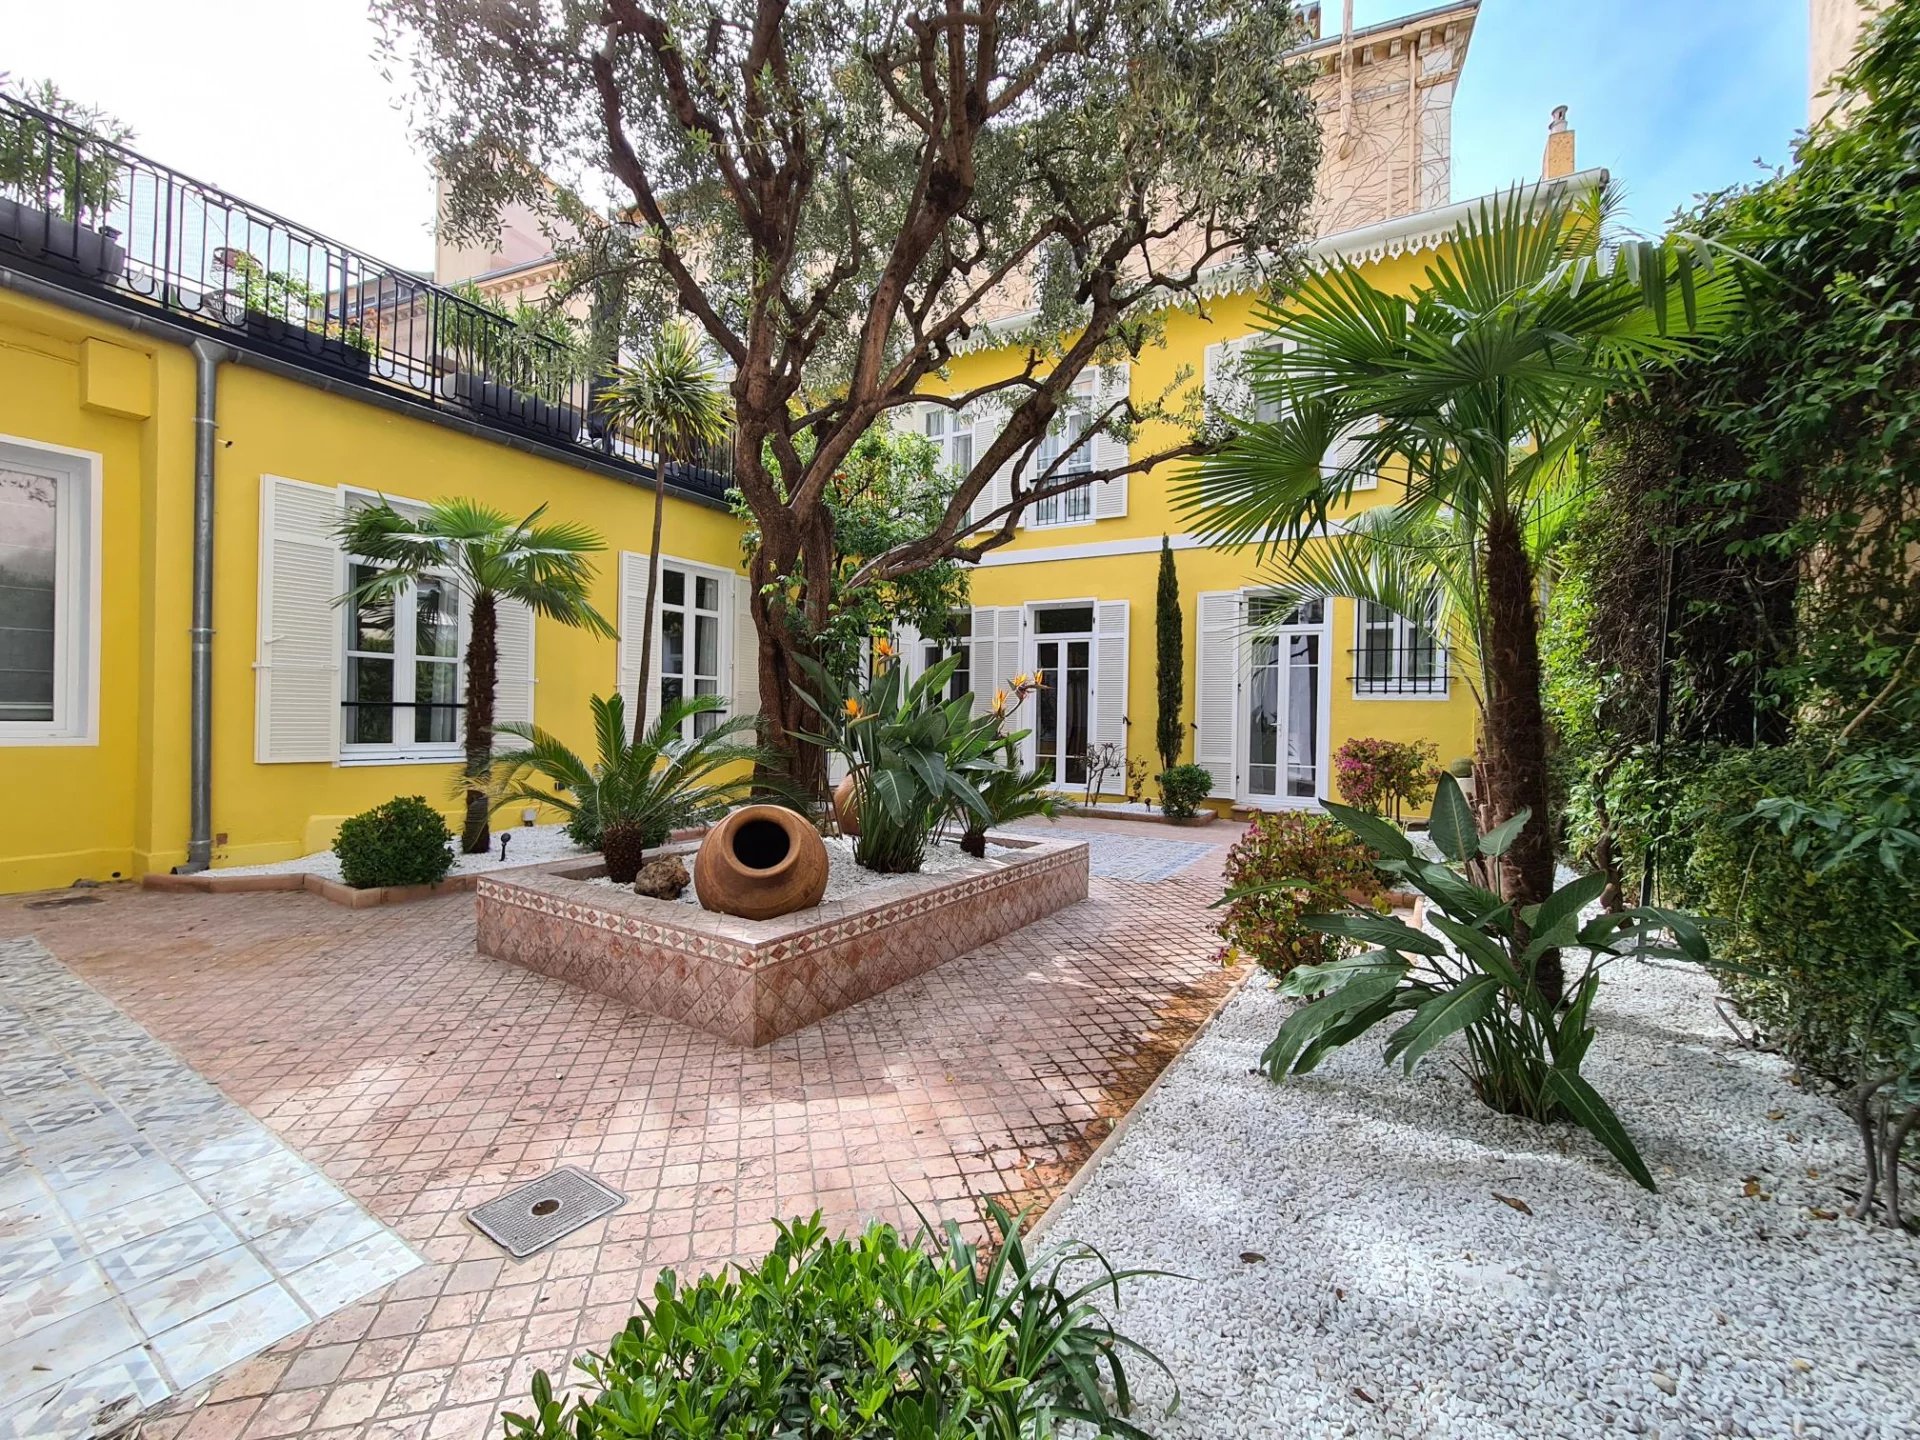 the June, secluded and stylish mediterranean villa for sale in the centre of Cannes